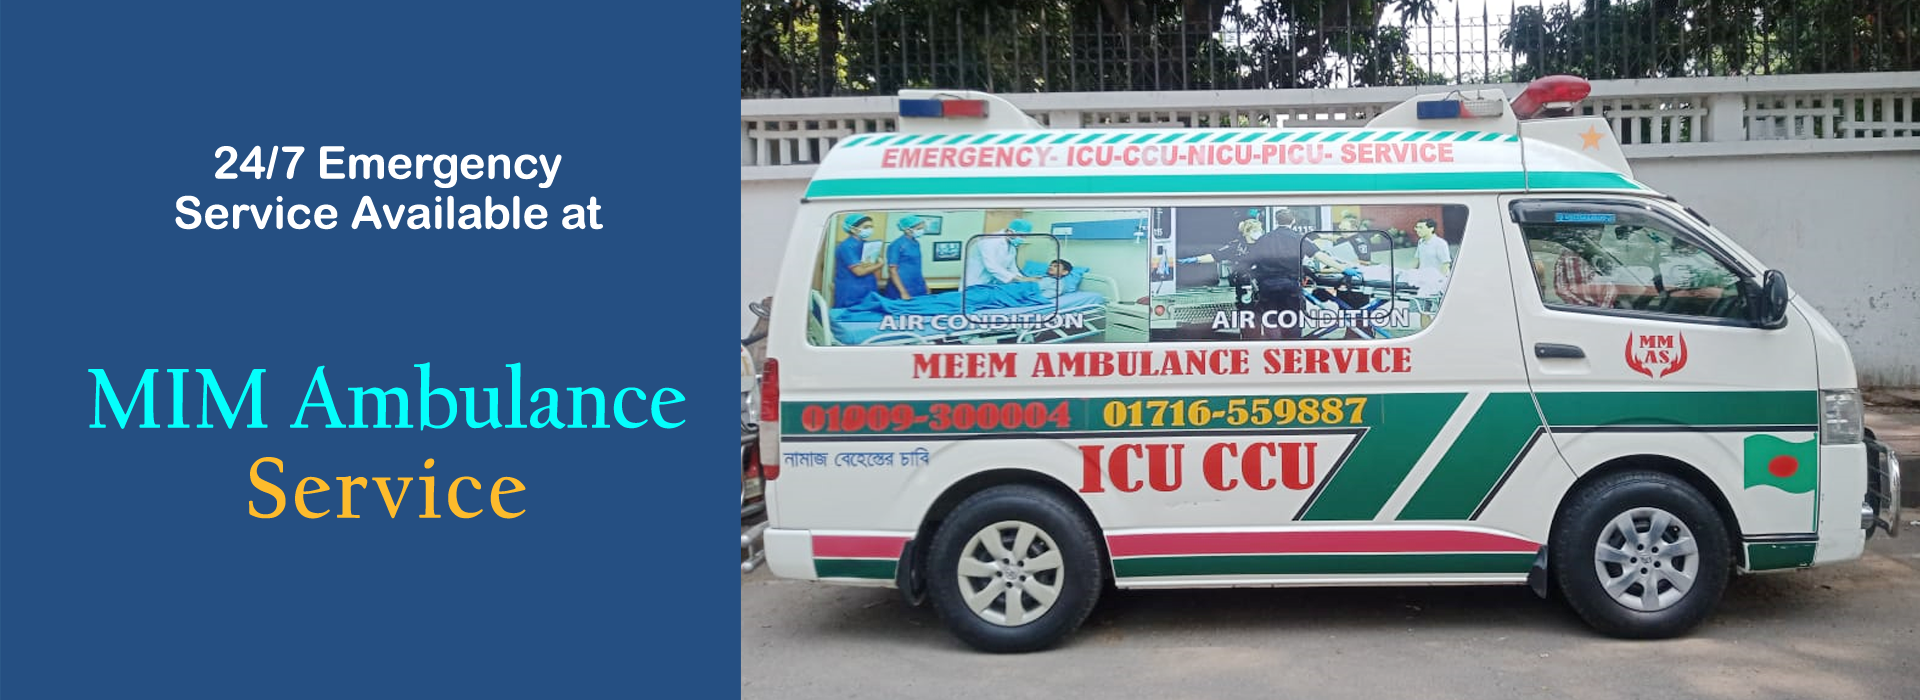 Discover the Best Emergency Ambulance Service in Dhaka at MIM Ambulance - Your Trusted Lifesaving Partner